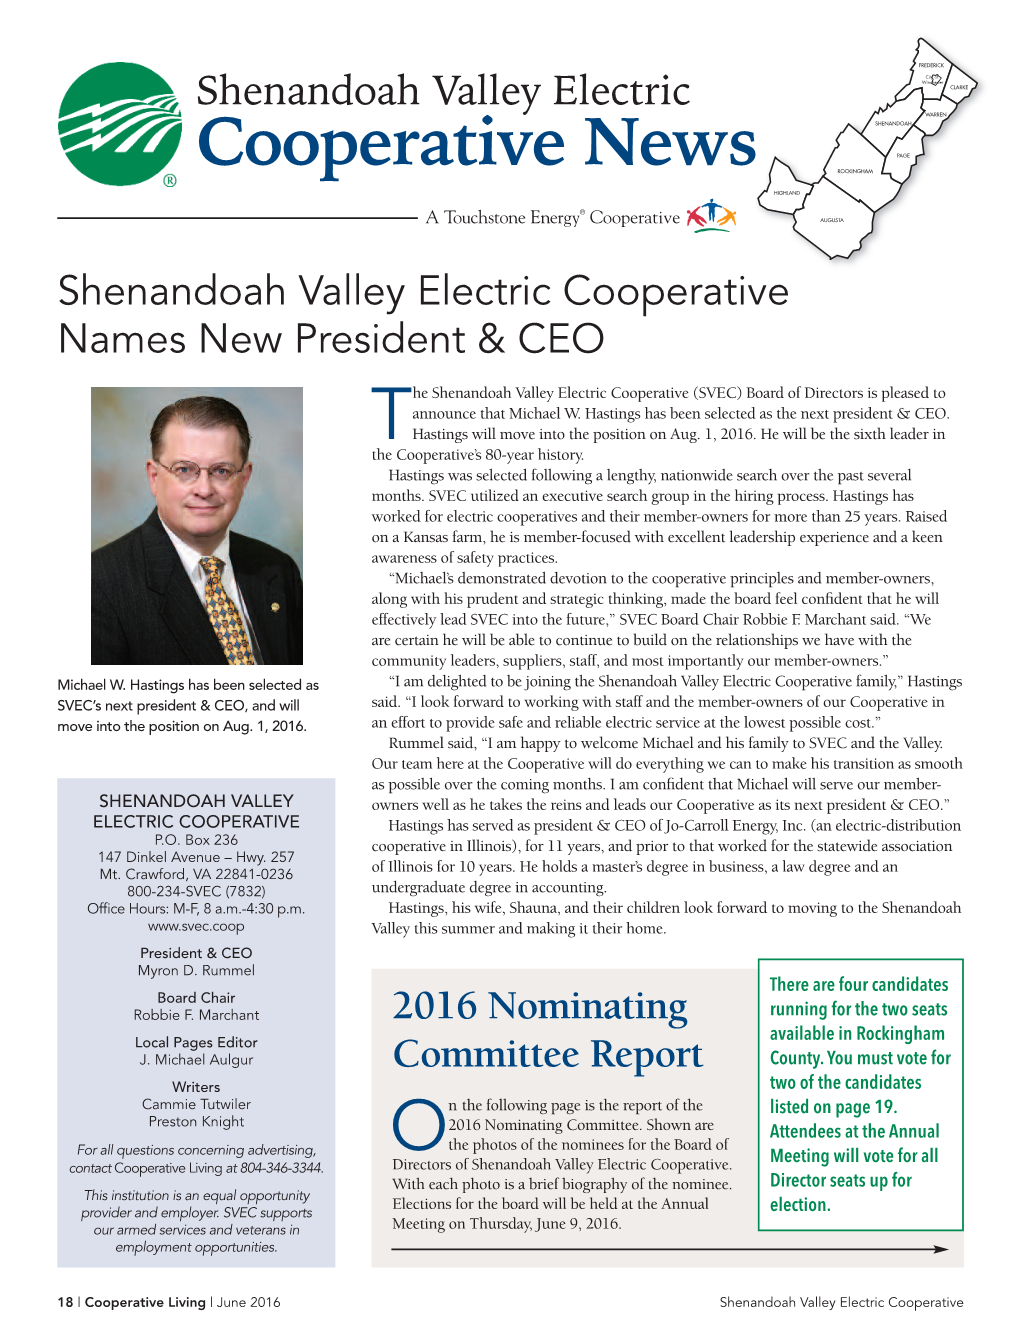 June 2016 Shenandoah Valley Electric Cooperative Rockingham County Nominees (In Alphabetical Order): * Indicates Present Director